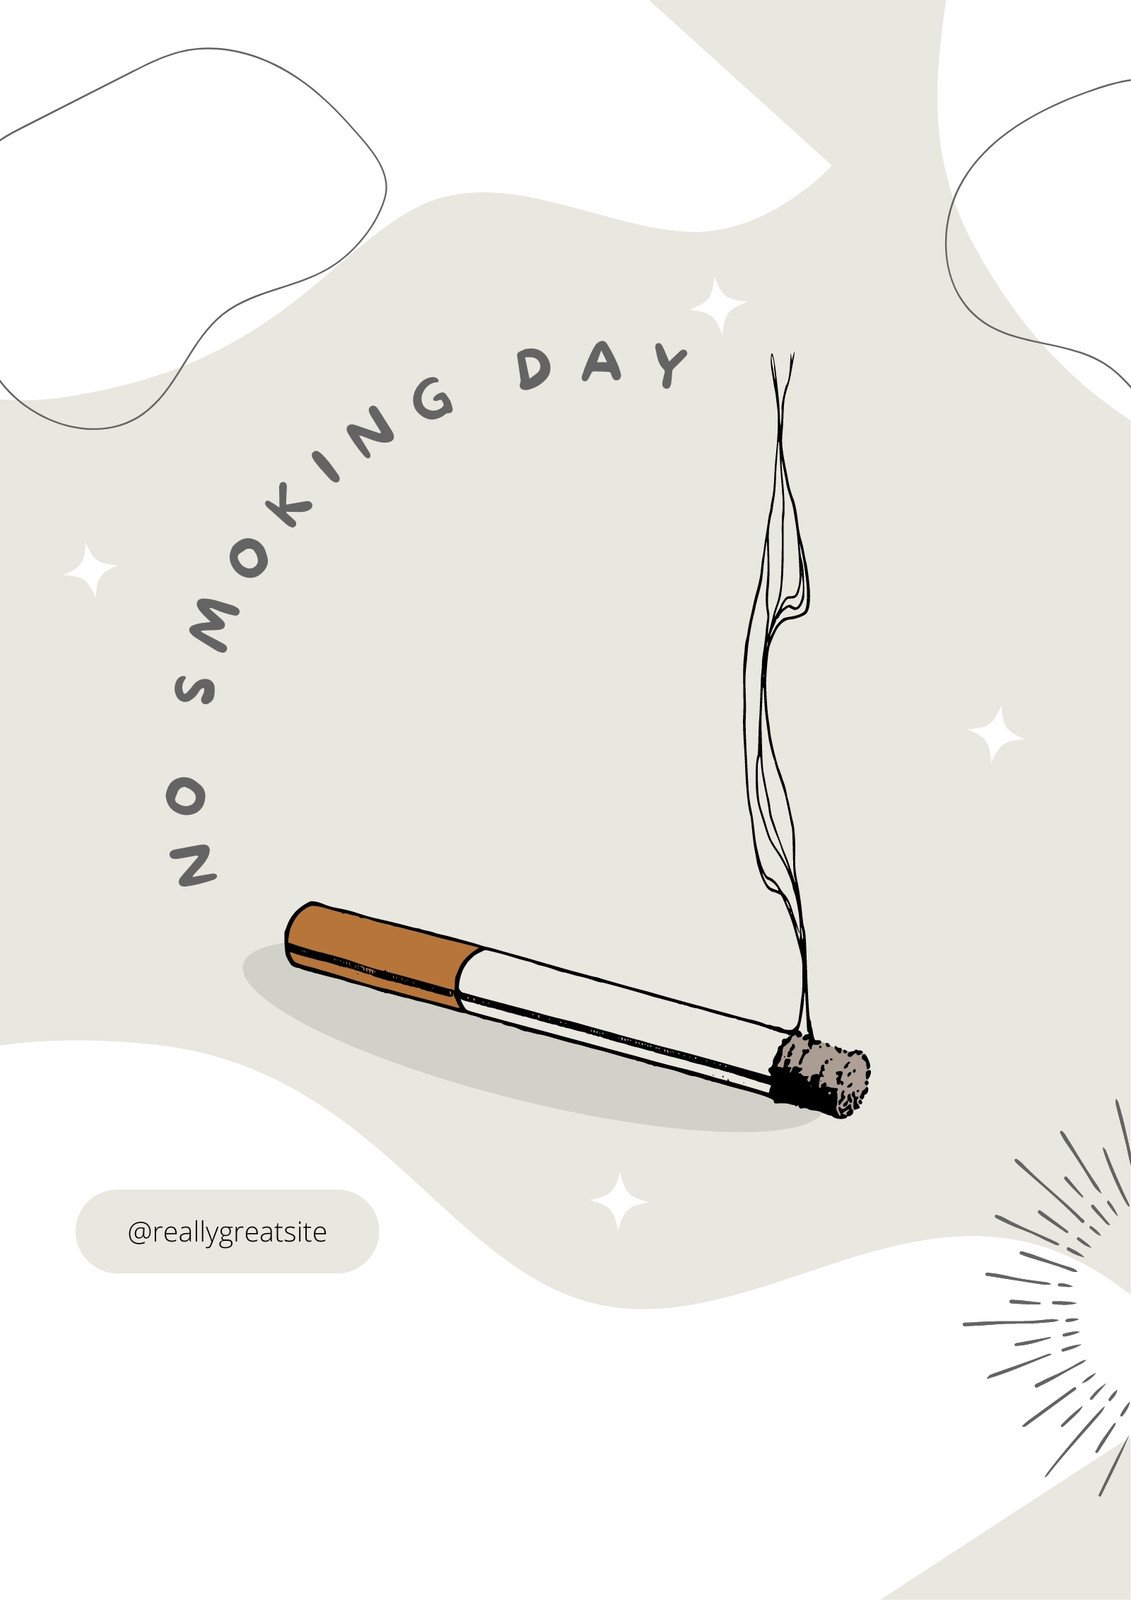 No Smoking designs, themes, templates and downloadable graphic elements on  Dribbble